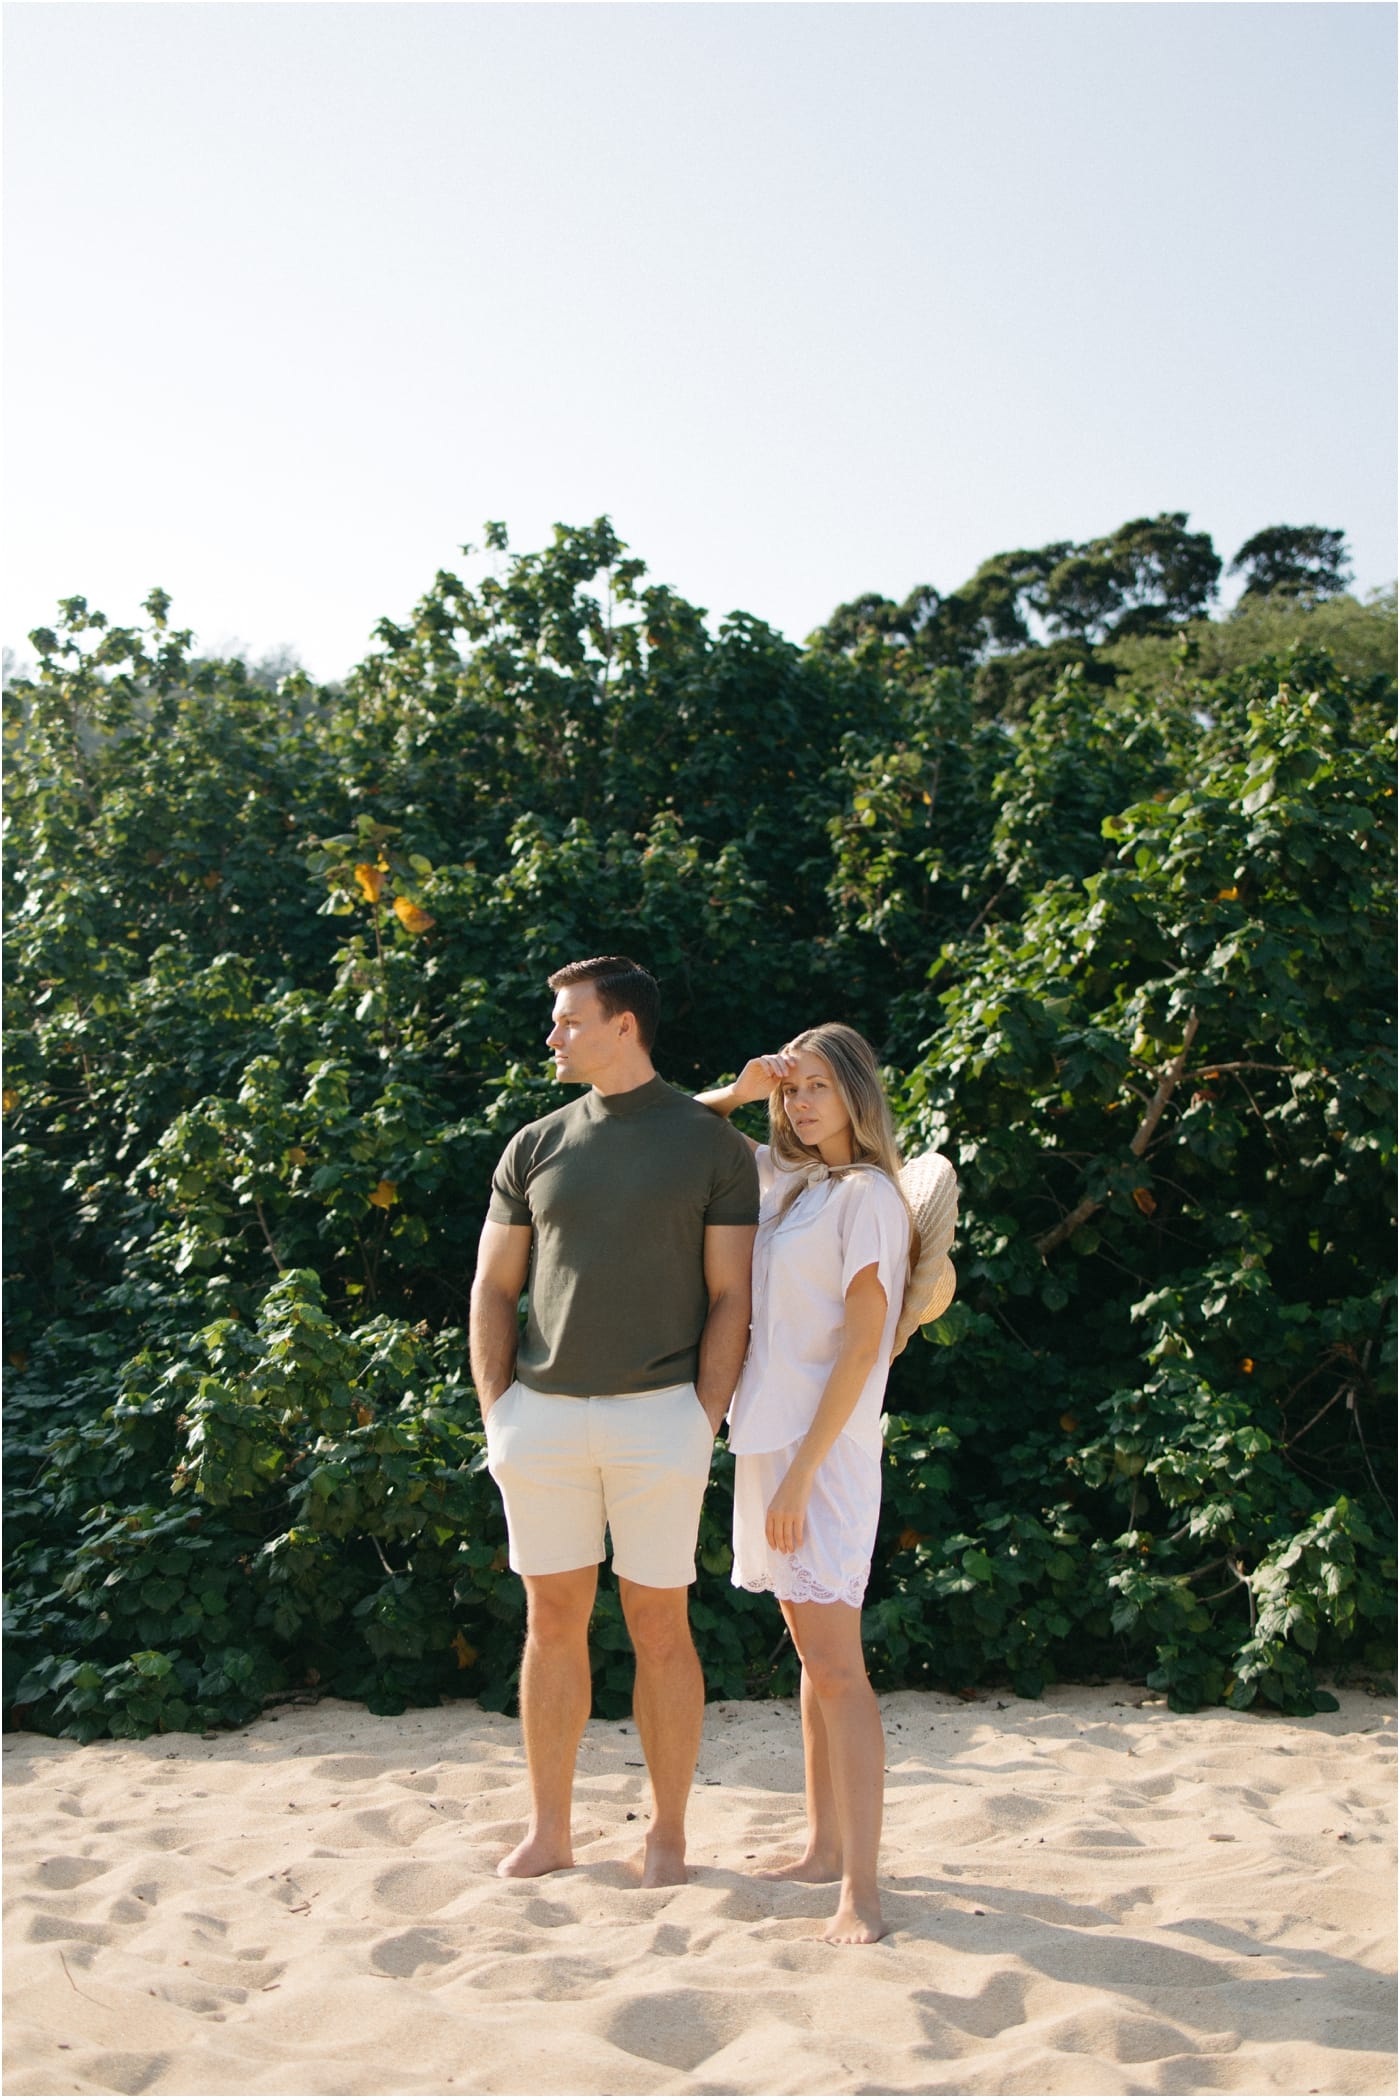 Three tips on how to style your engagement session on Oahu